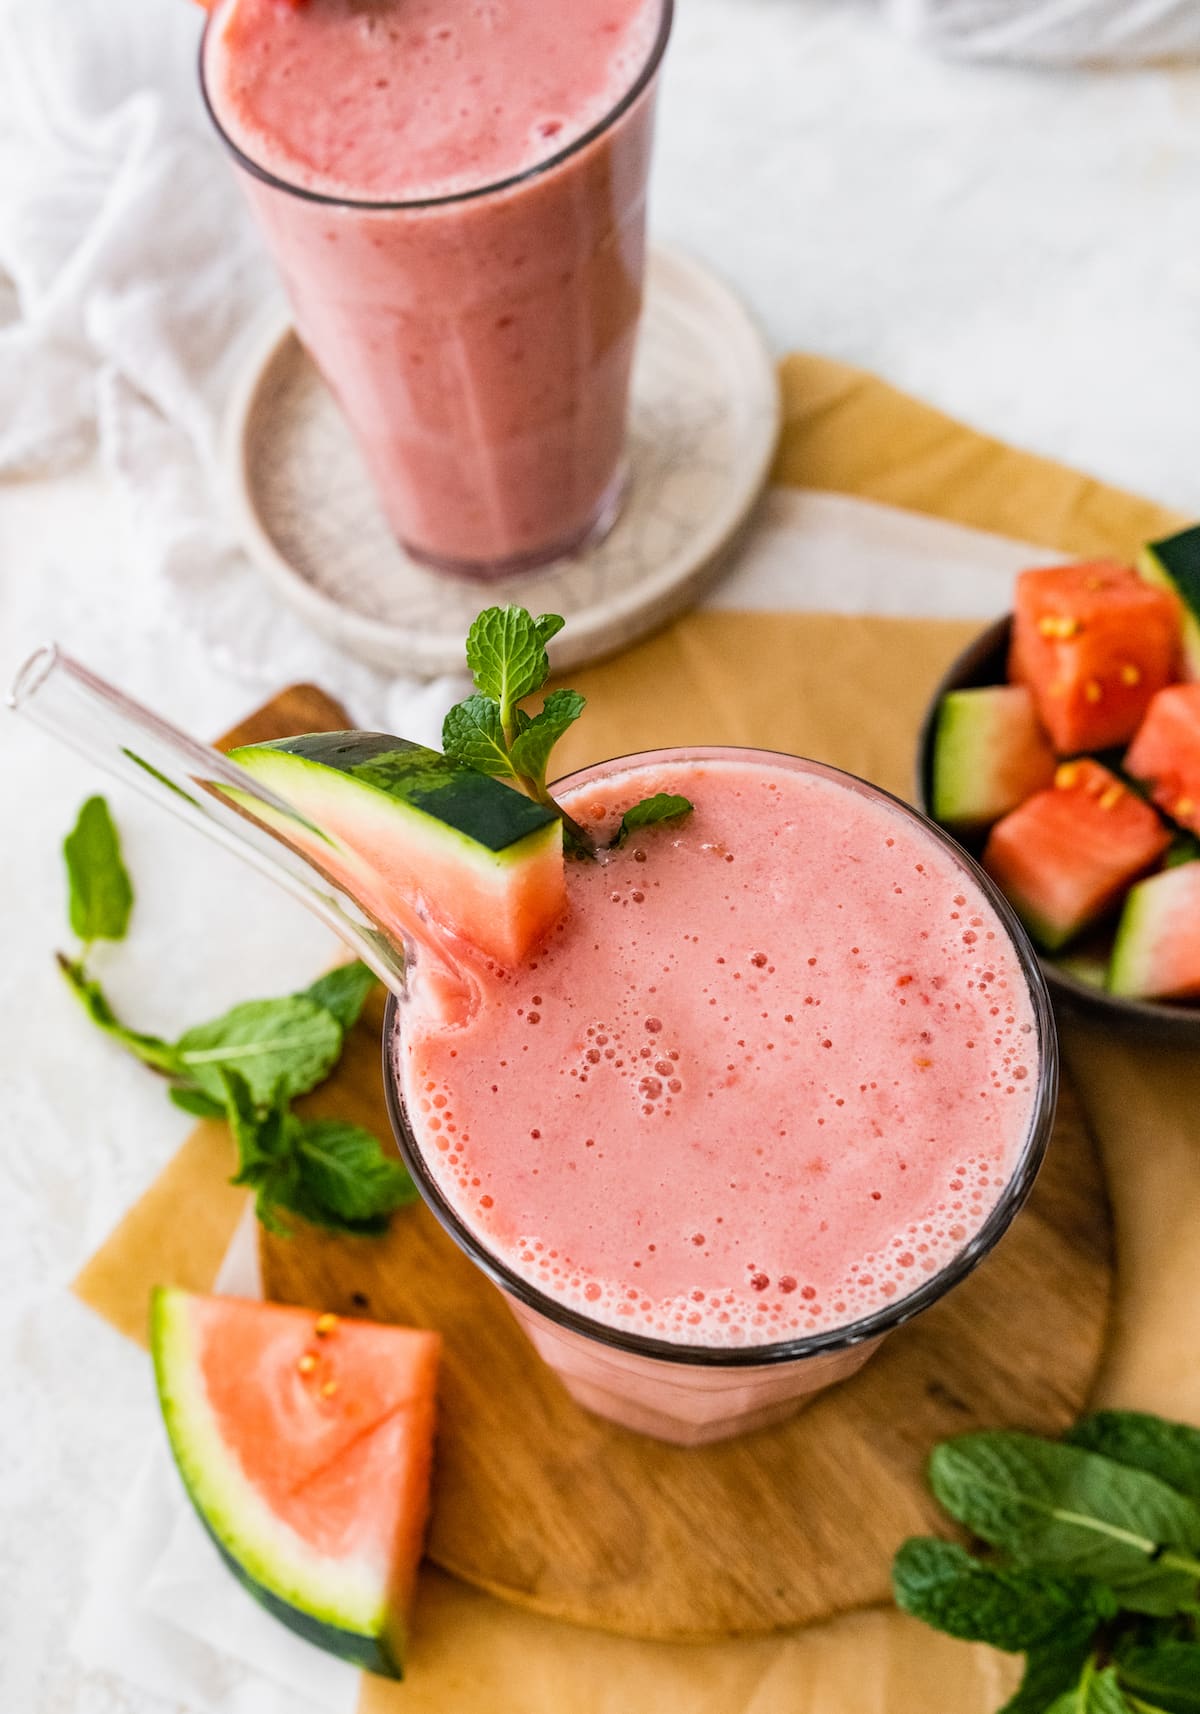 Watermelon smoothie with straw and slice of fresh watermelon.